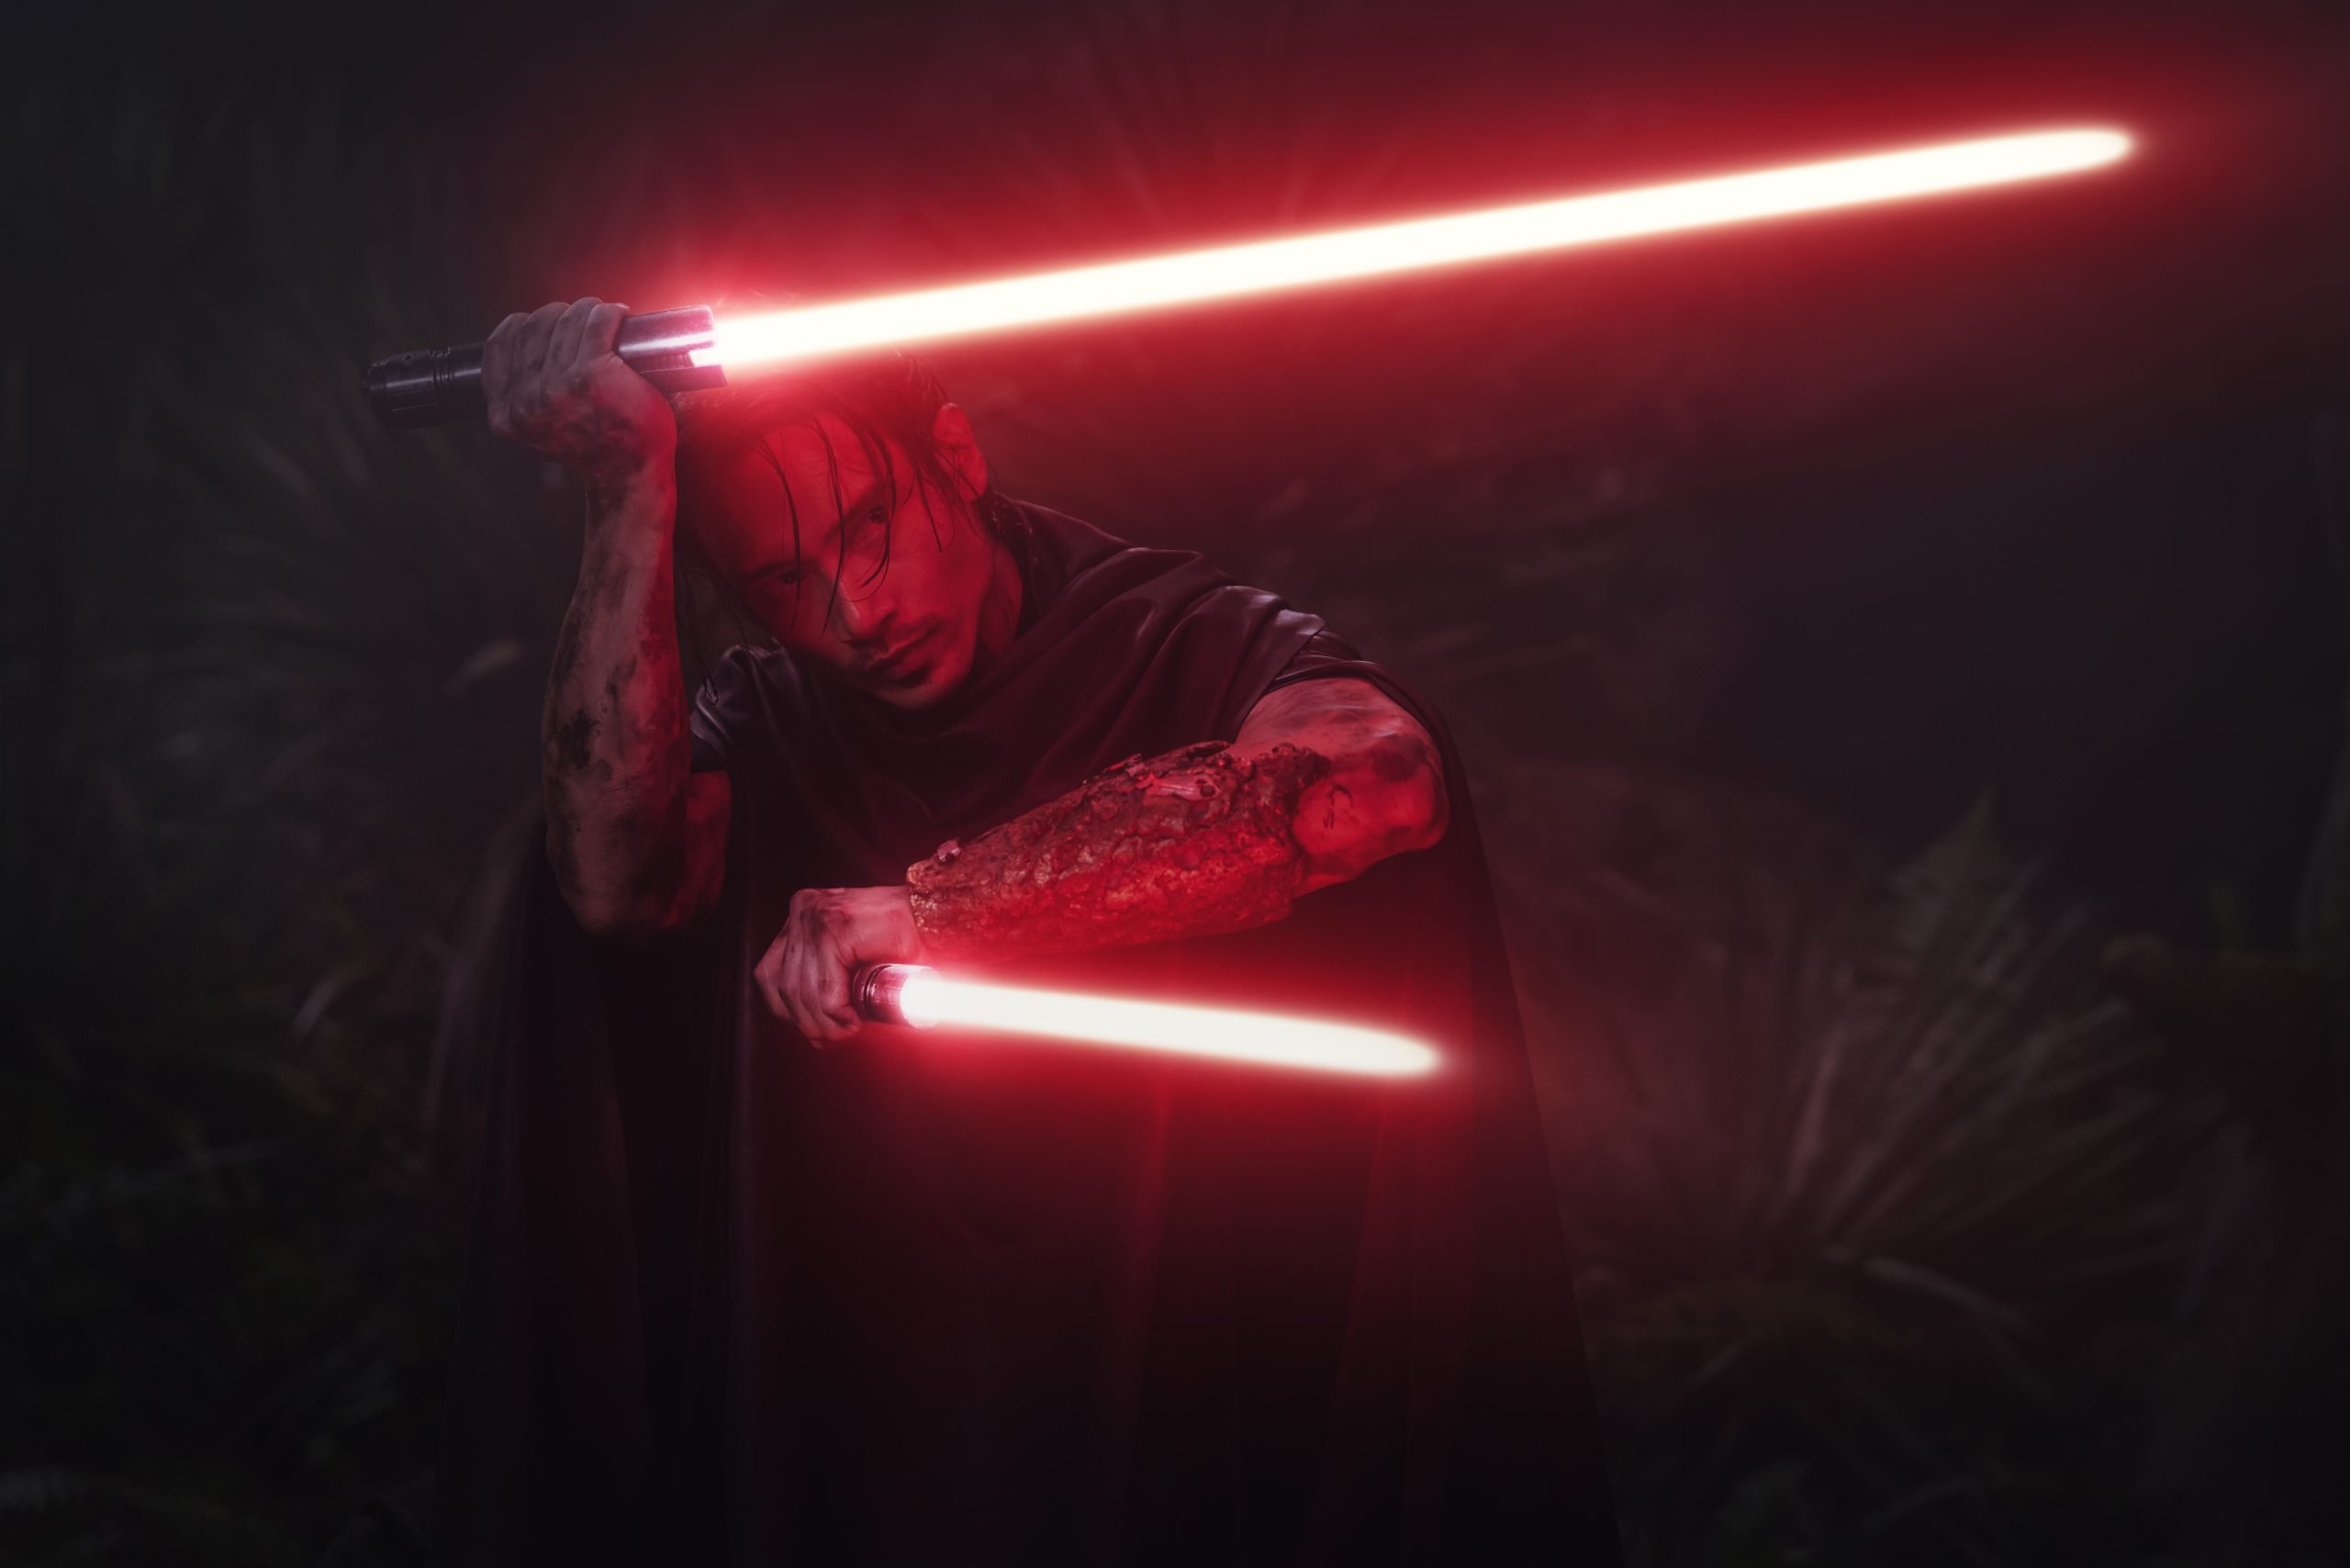 The Acolyte action choreography team breaks down the season’s highlights, including new fighting styles and a Wookiee Jedi